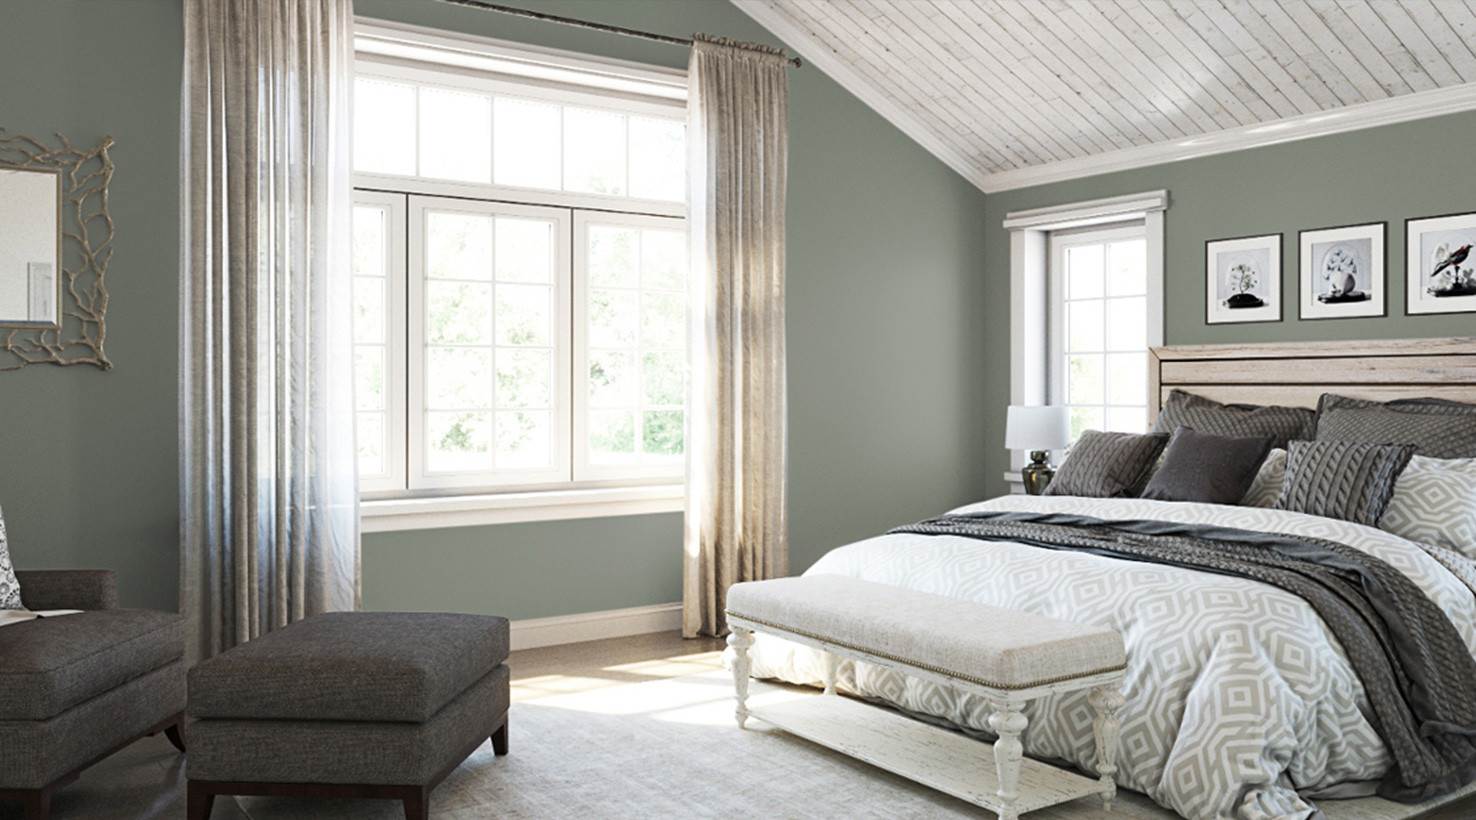 Sherwin Williams Bedroom Colors
 Bedroom Paint Color Ideas Inspiration Gallery